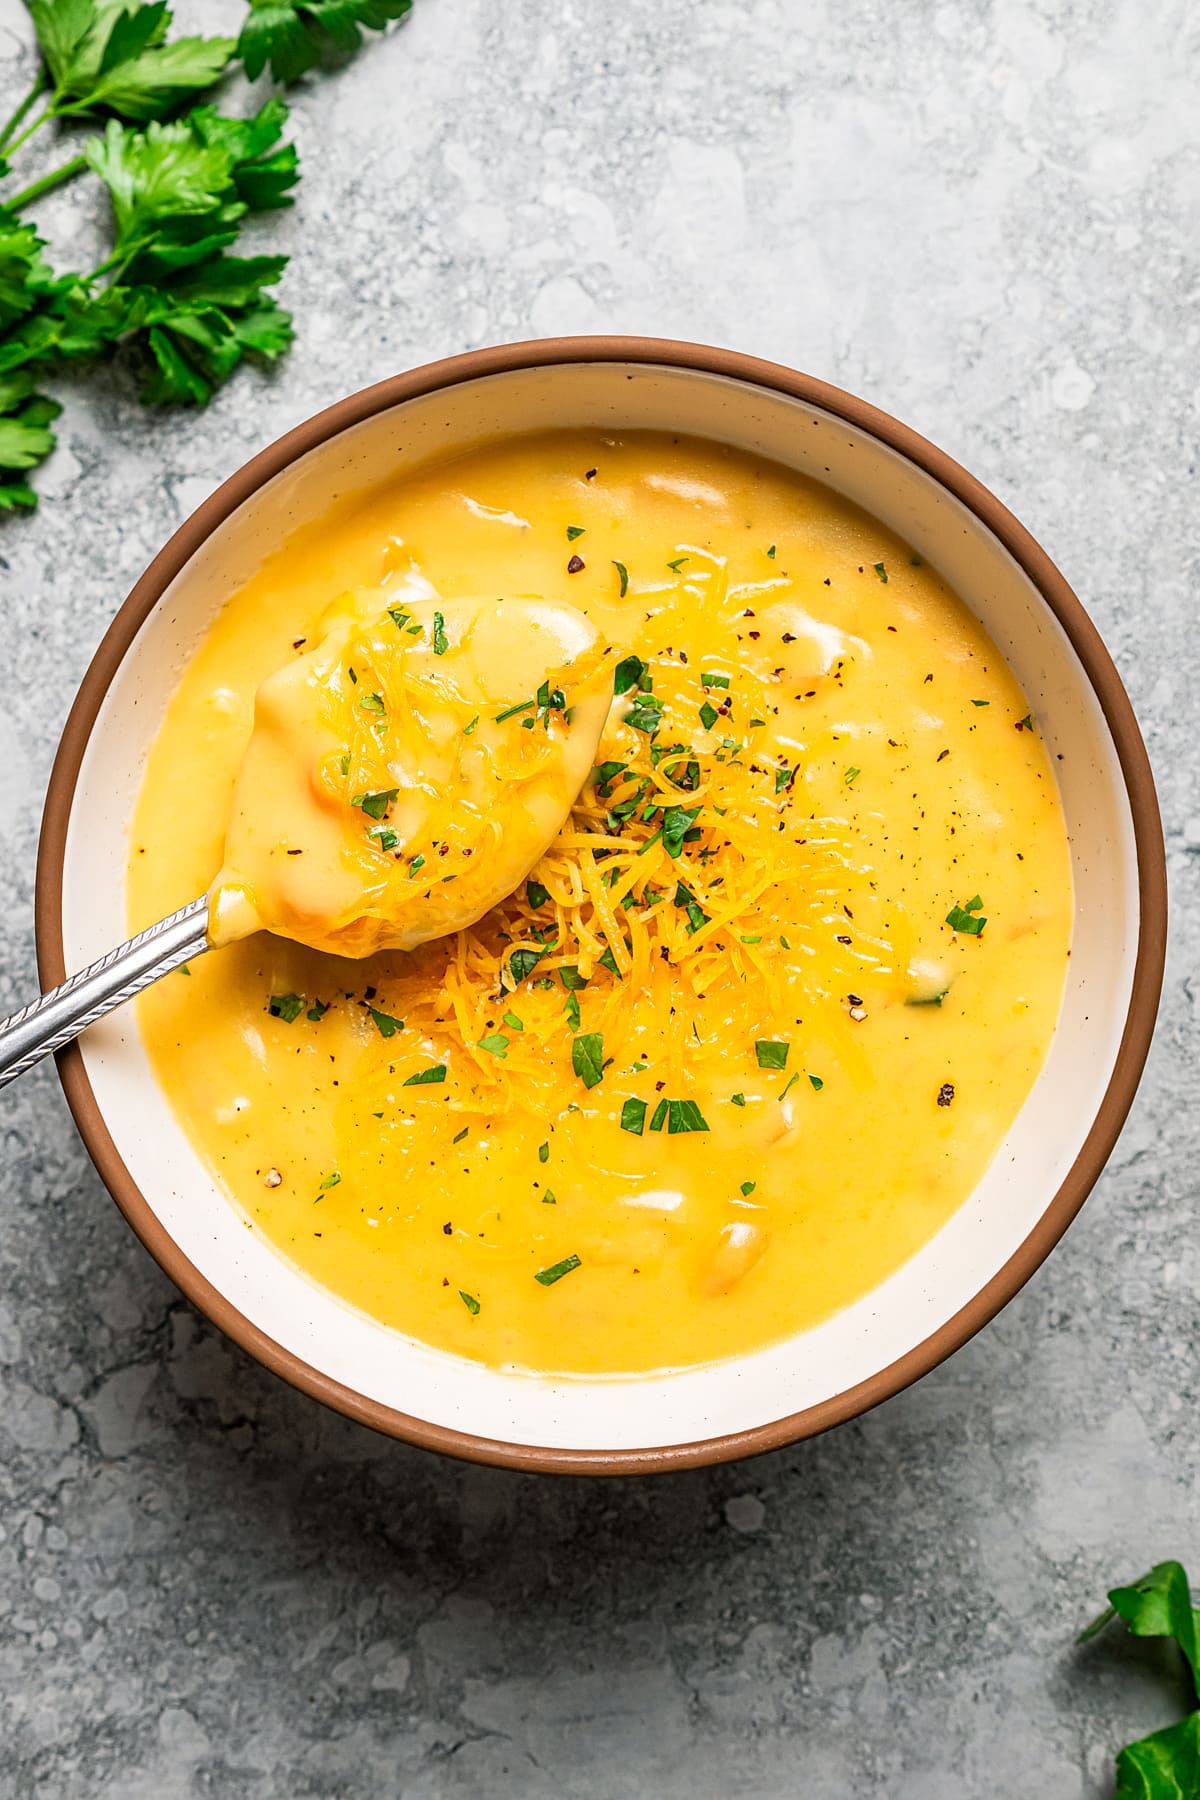 A spoonful of soup held over a bowl of beer cheese soup garnished with chopped parsley.